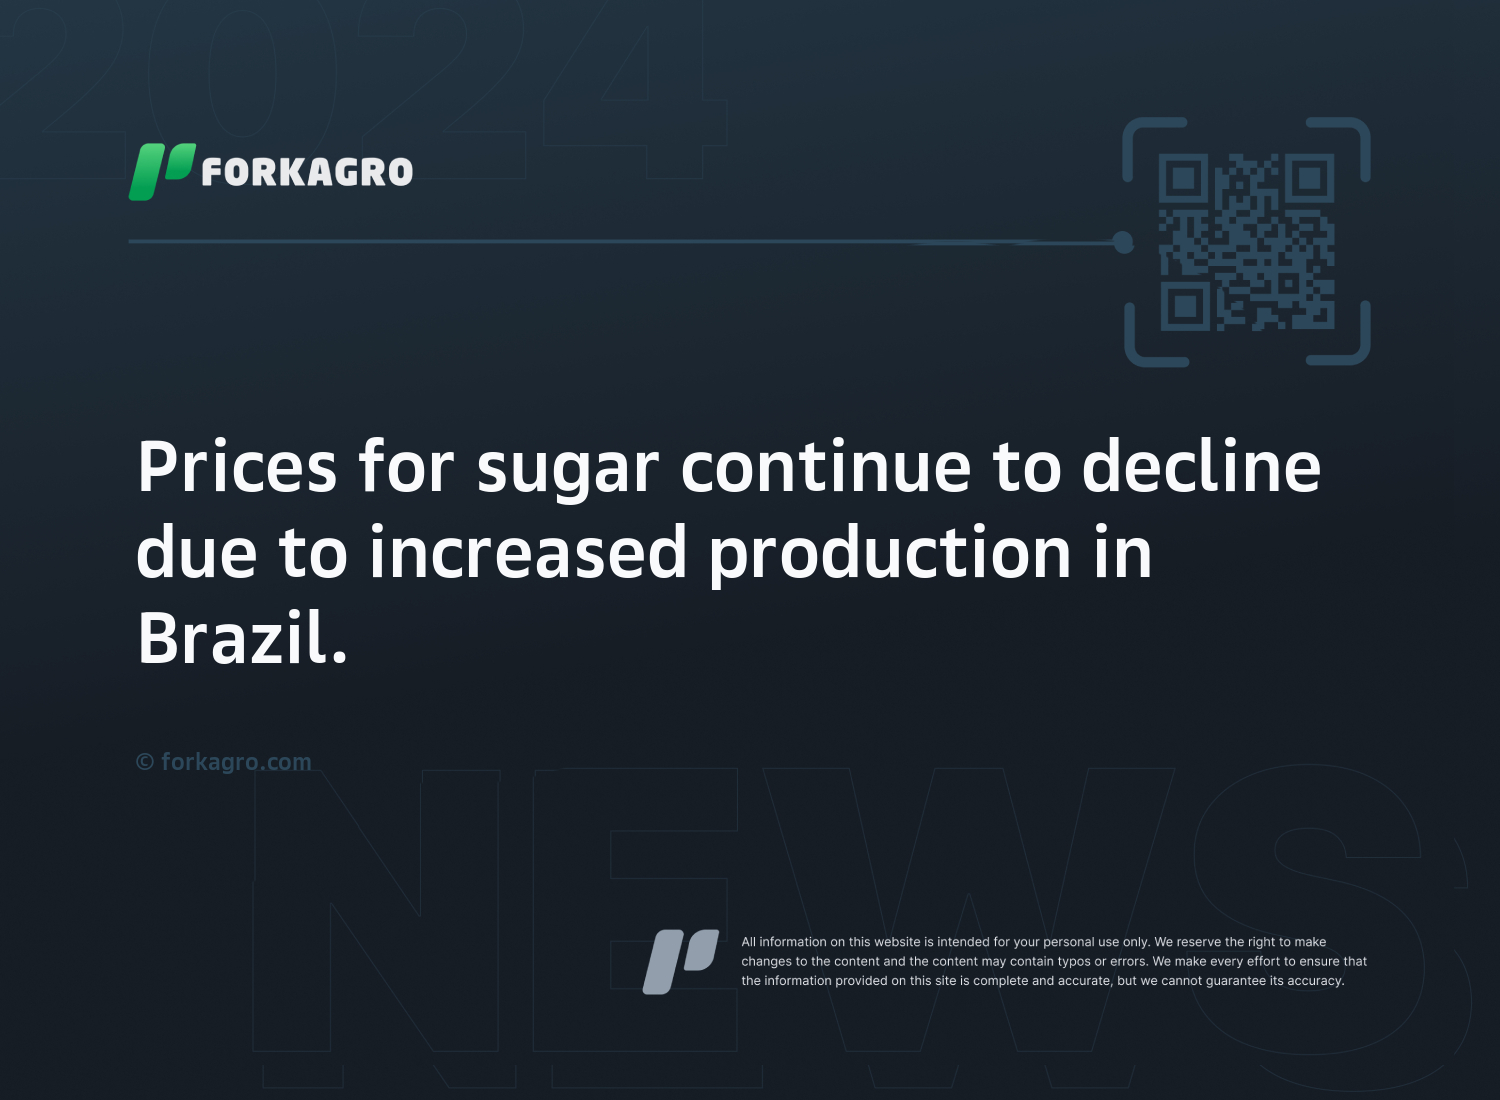 Prices for sugar continue to decline due to increased production in Brazil.